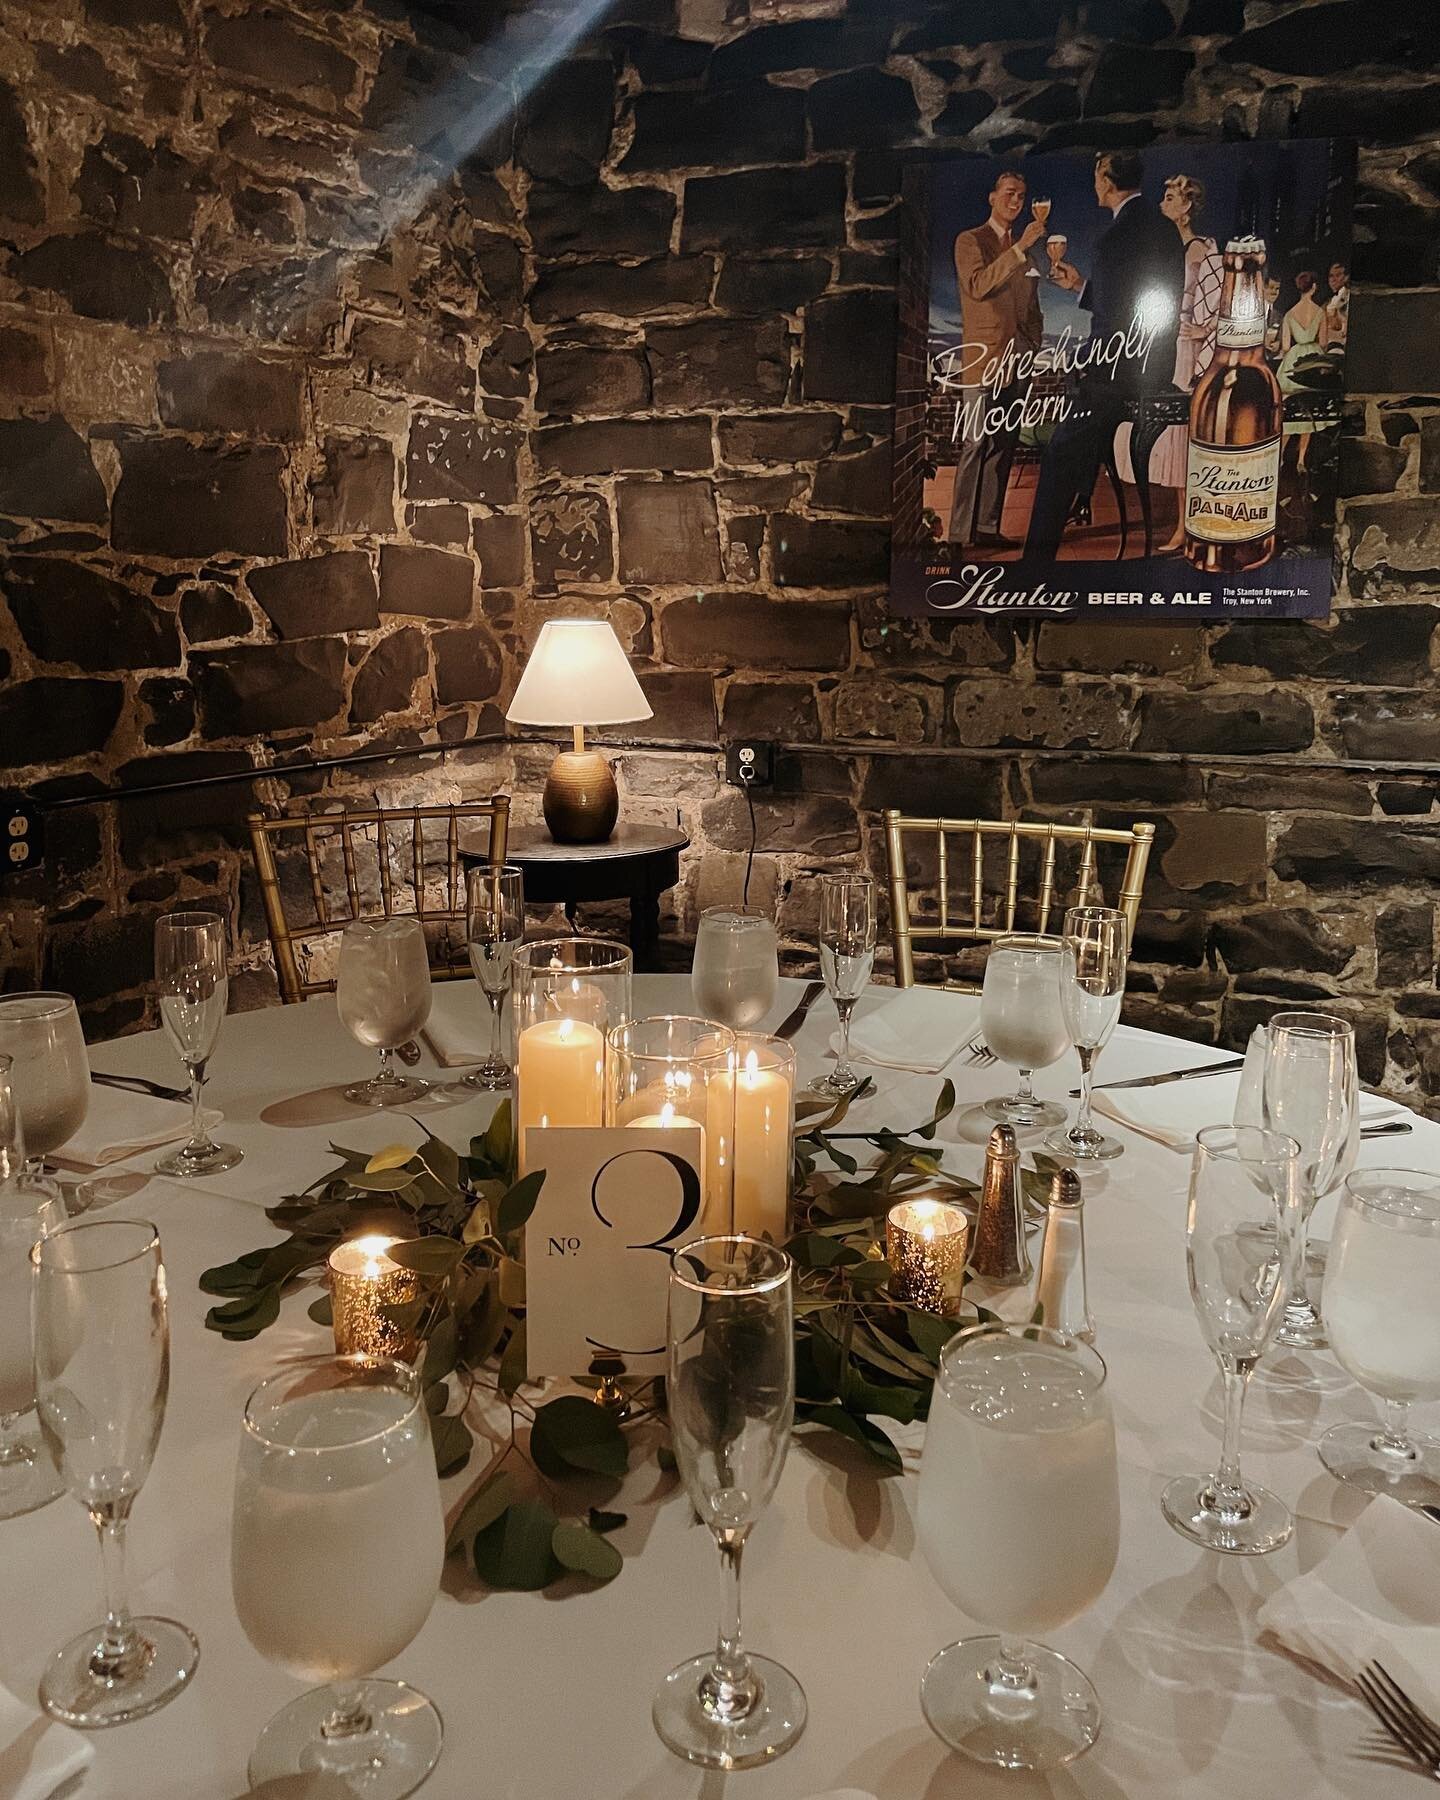 Last week we had a super intimate wedding reception in The Malt Room 🤍 Congratulations to Dan &amp; Devin! 

Absolutely the coziest of private spaces we have here at Brown&rsquo;s! From birthday parties to weddings, the Malt Room does it all!